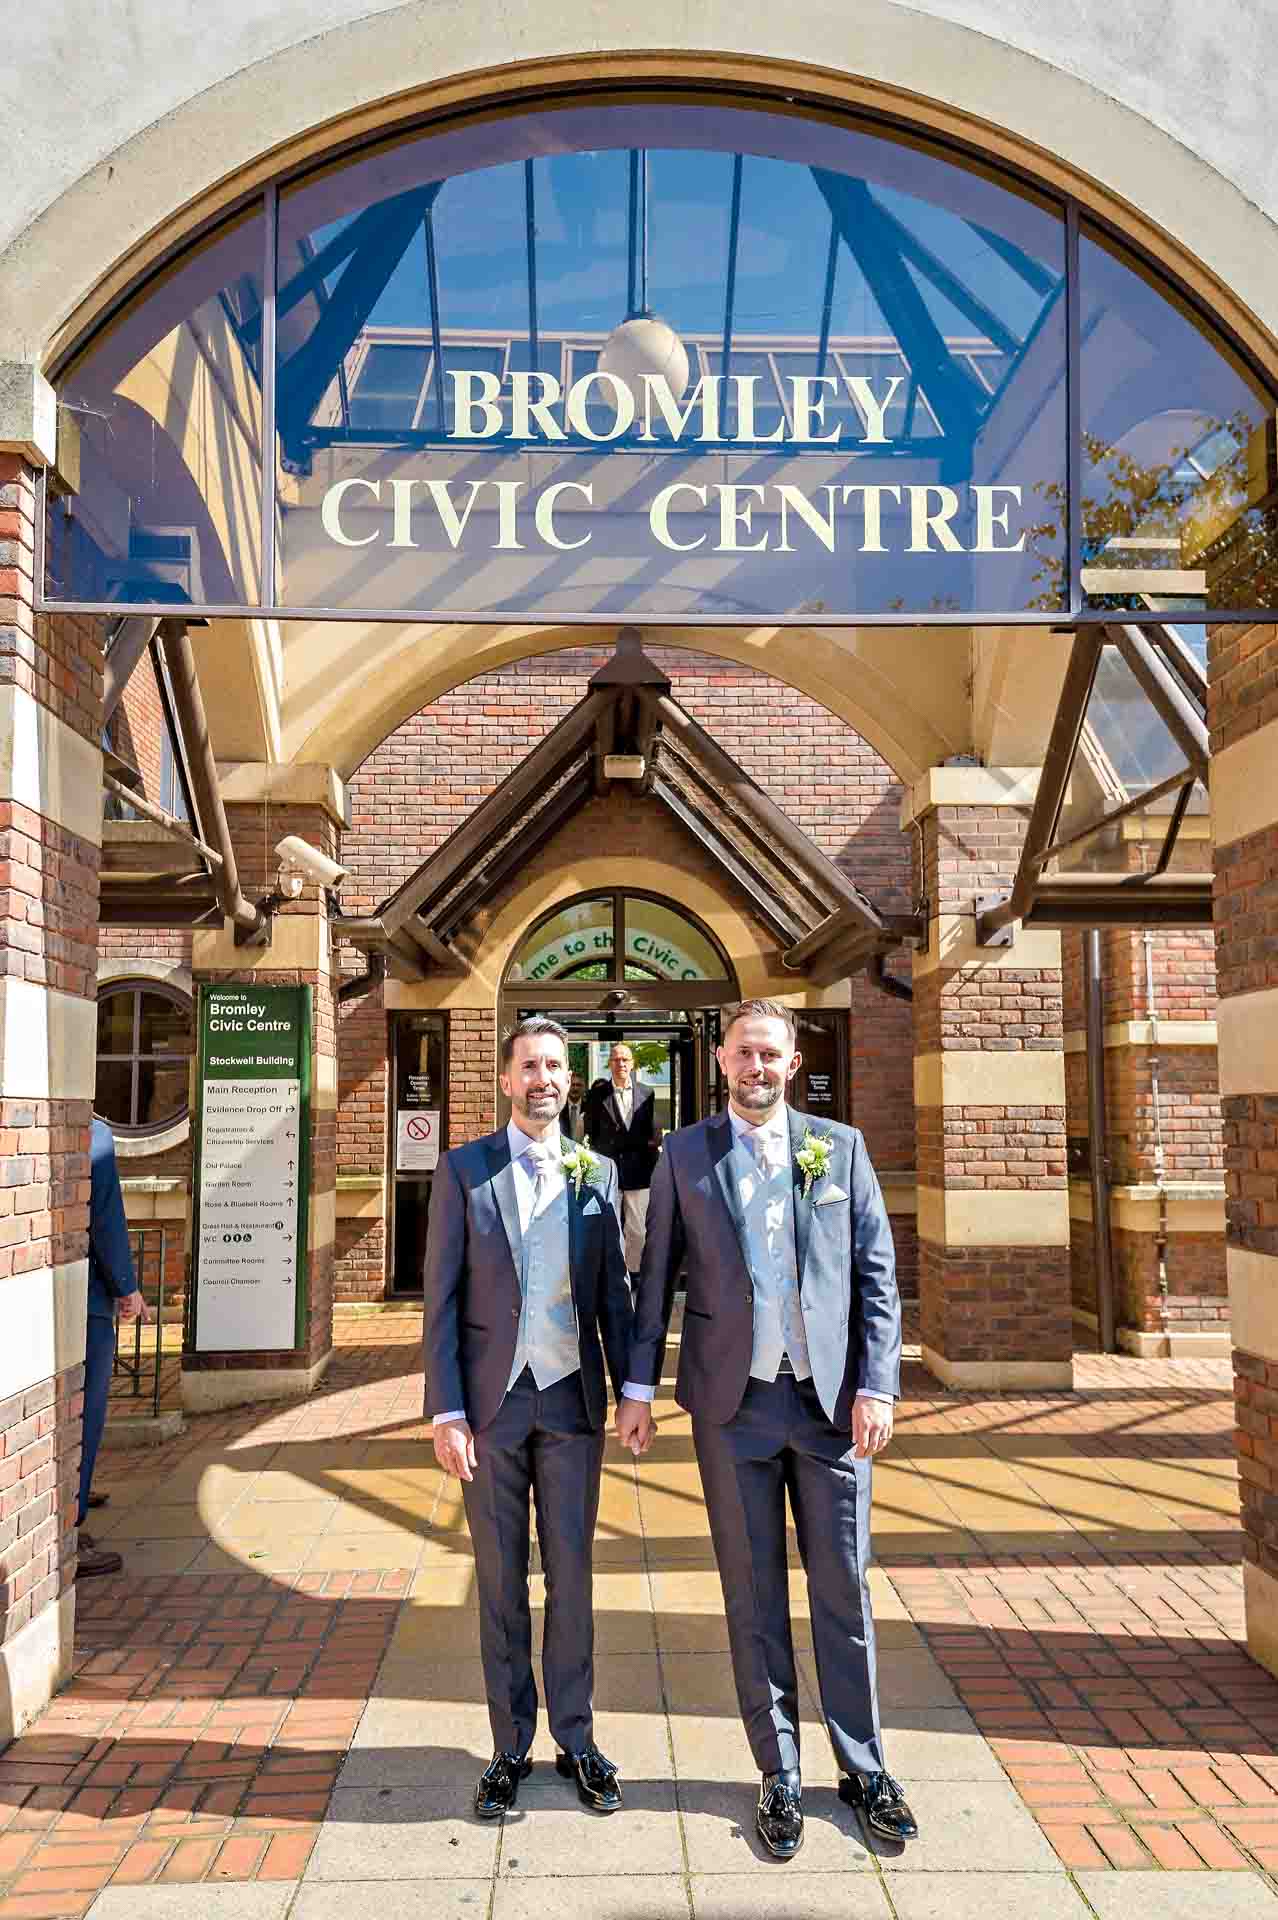 Same-sex wedding grooms standing together in front of Bromley Civic Centre